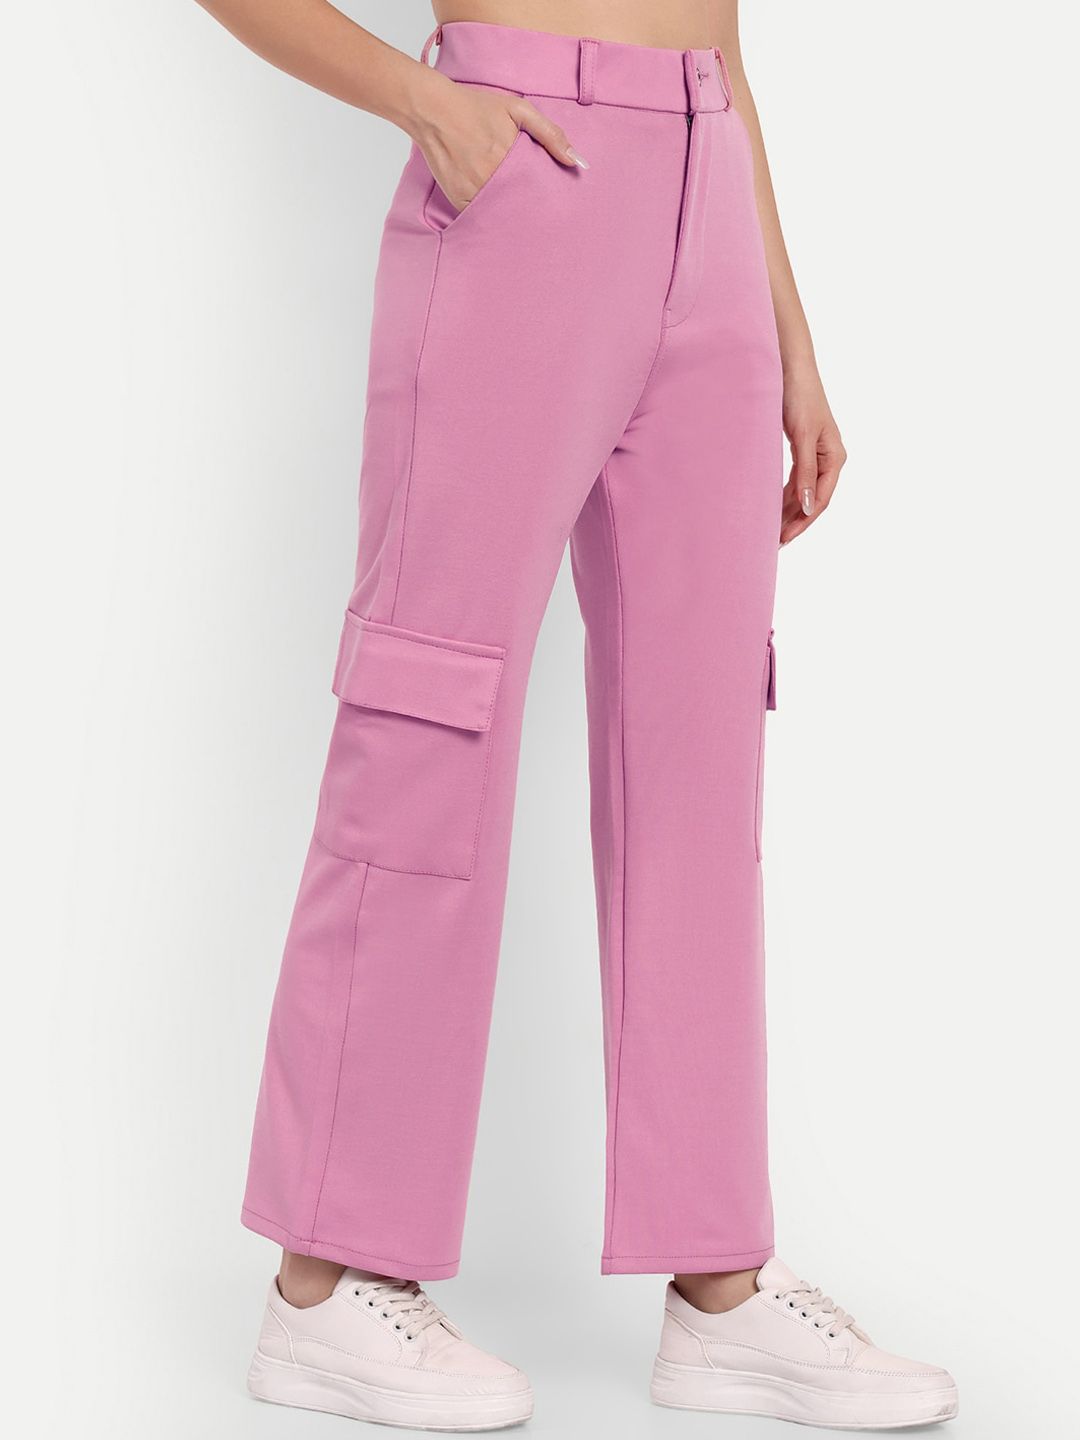 Next One Women Smart Straight Fit Easy Wash Cargo Trousers Price in India